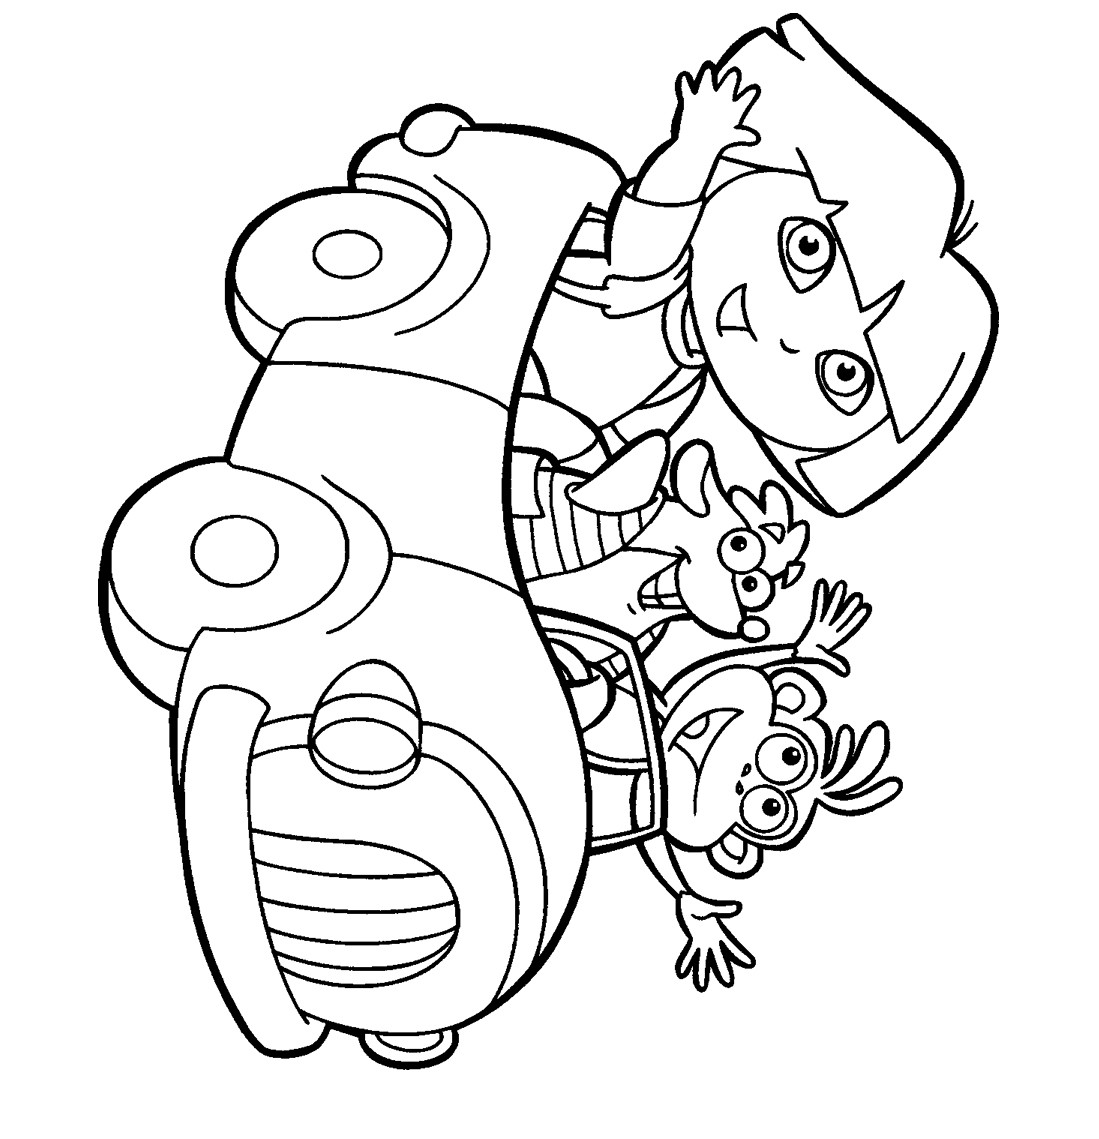 Print Coloring Pages For Kids
 Printable coloring pages for kids